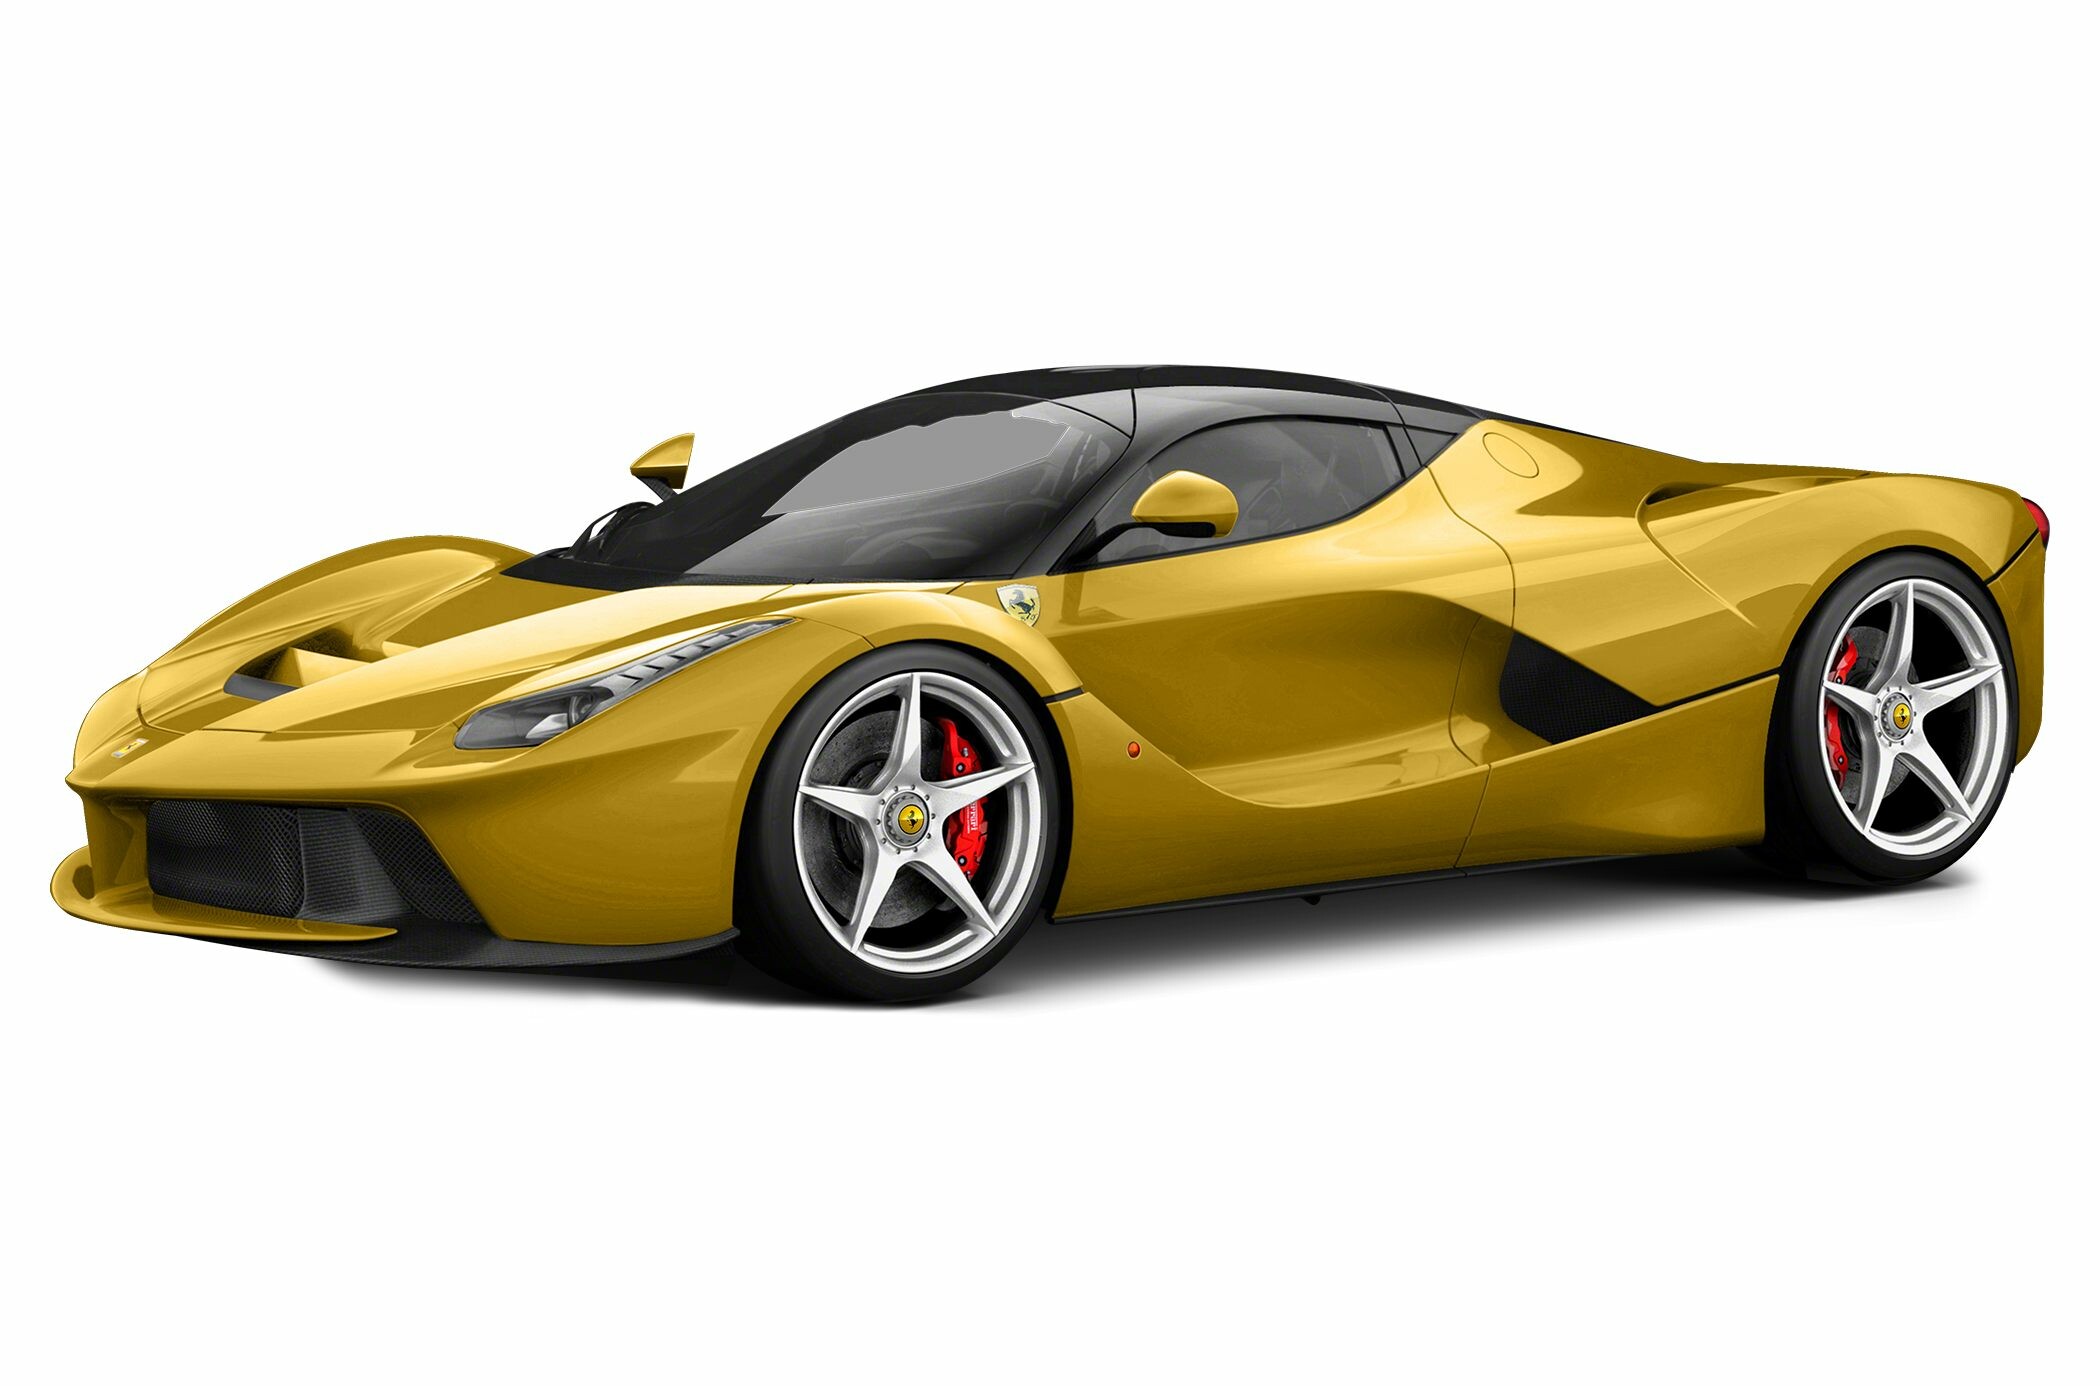 Ferrari: Based on findings from testing of the FXX development prototype and on research being conducted by the Millechili Project at the University of Modena. 2100x1390 HD Background.